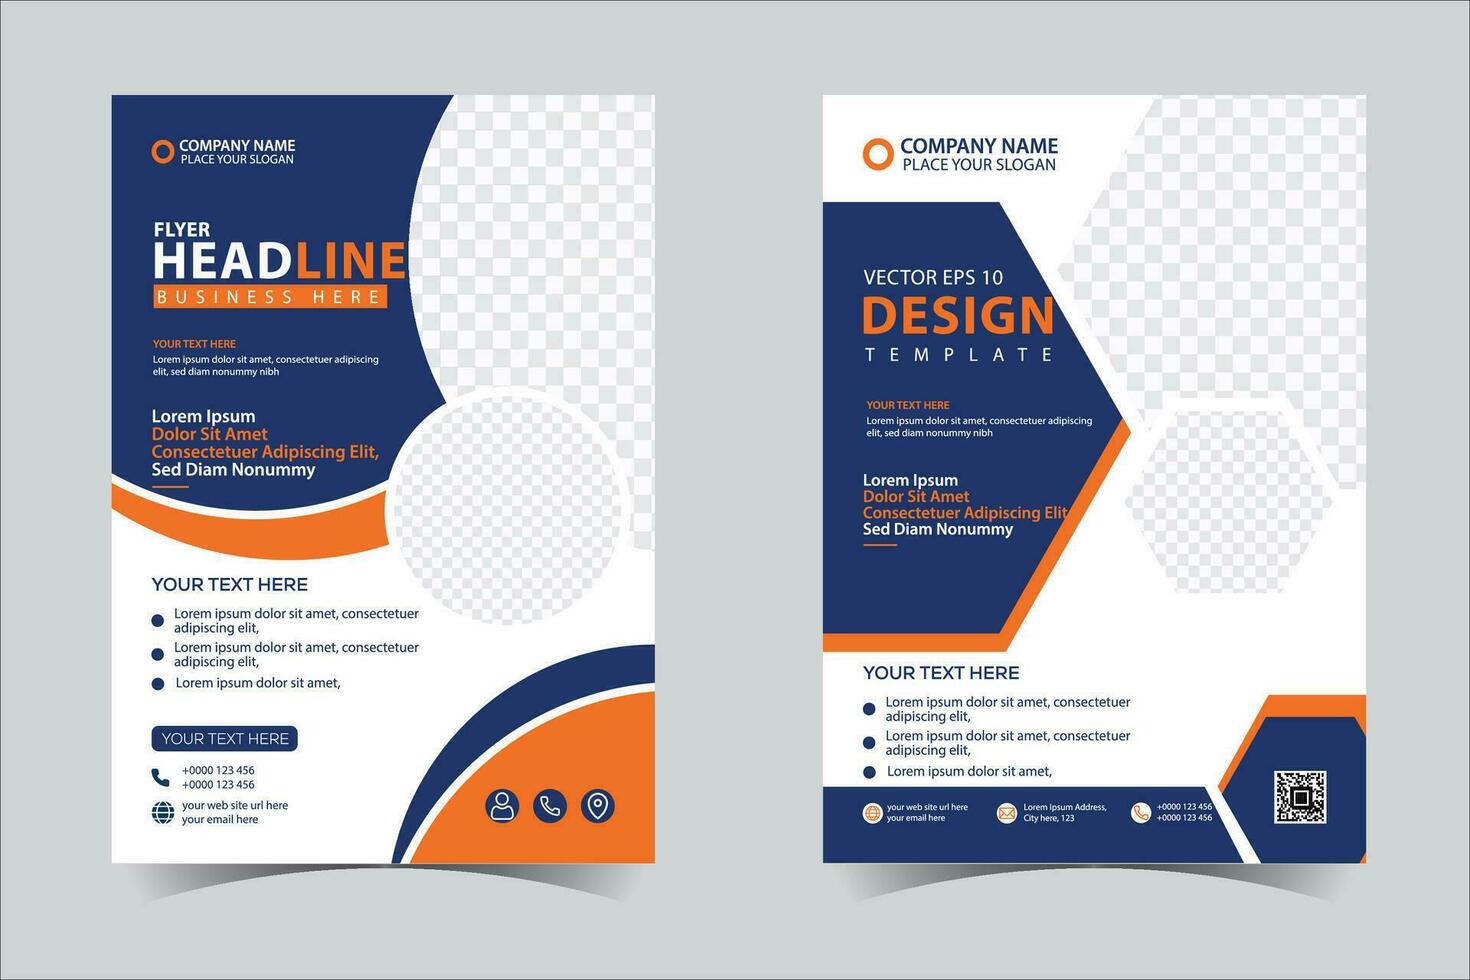 Brochure template layout design. Corporate business annual report, catalog, magazine, flyer mockup. Creative modern bright concept Blue and orange color vector